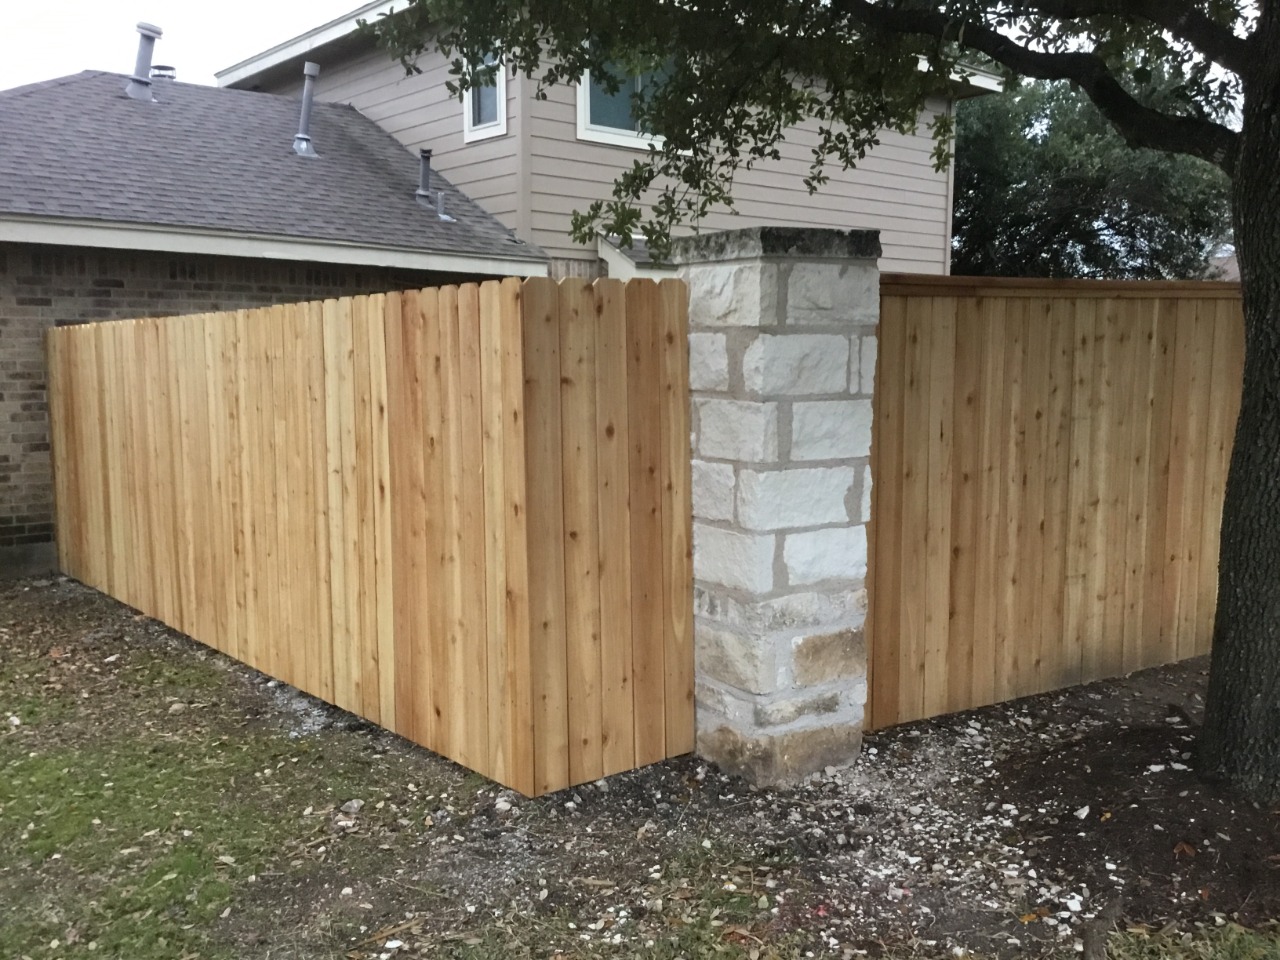 six foot privacy fence with cap and trim connected to stone pillars